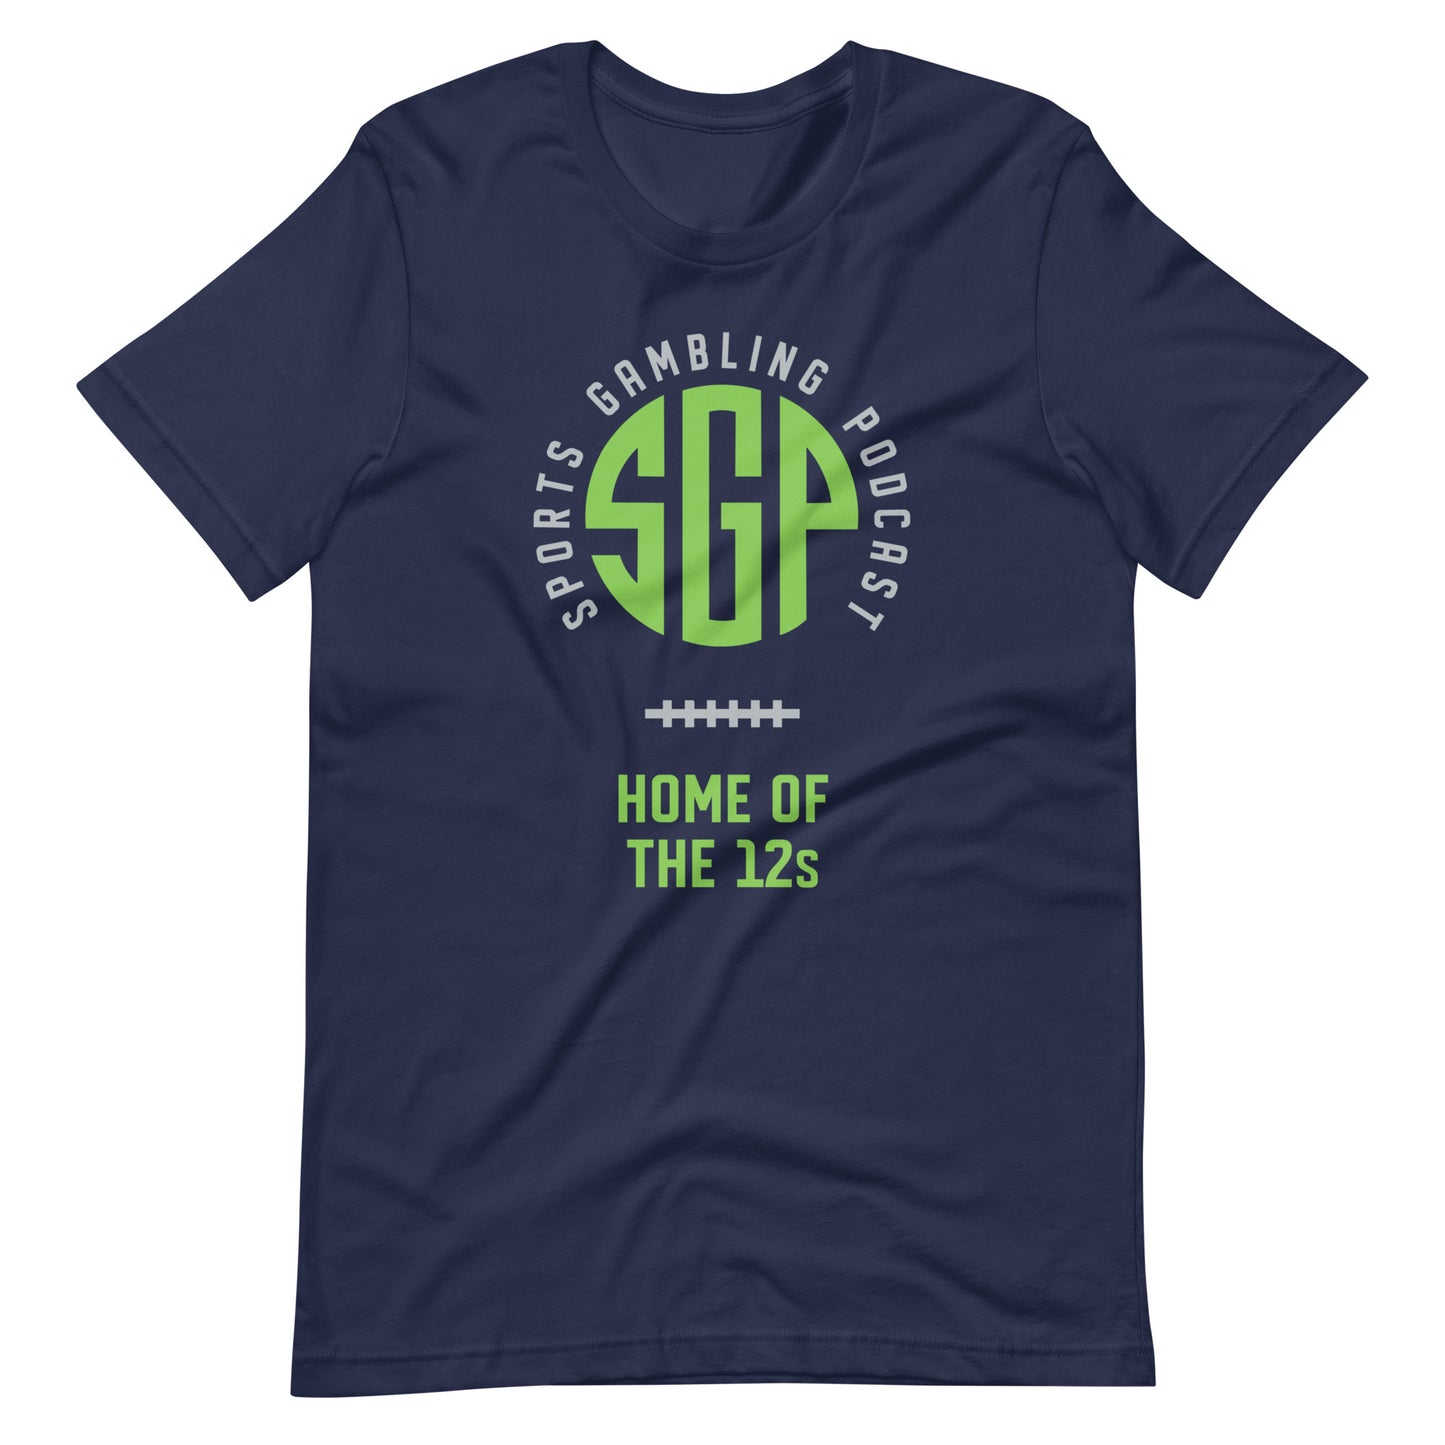 SGP - Home of the 12s - Sunday edition - Navy Unisex t-shirt